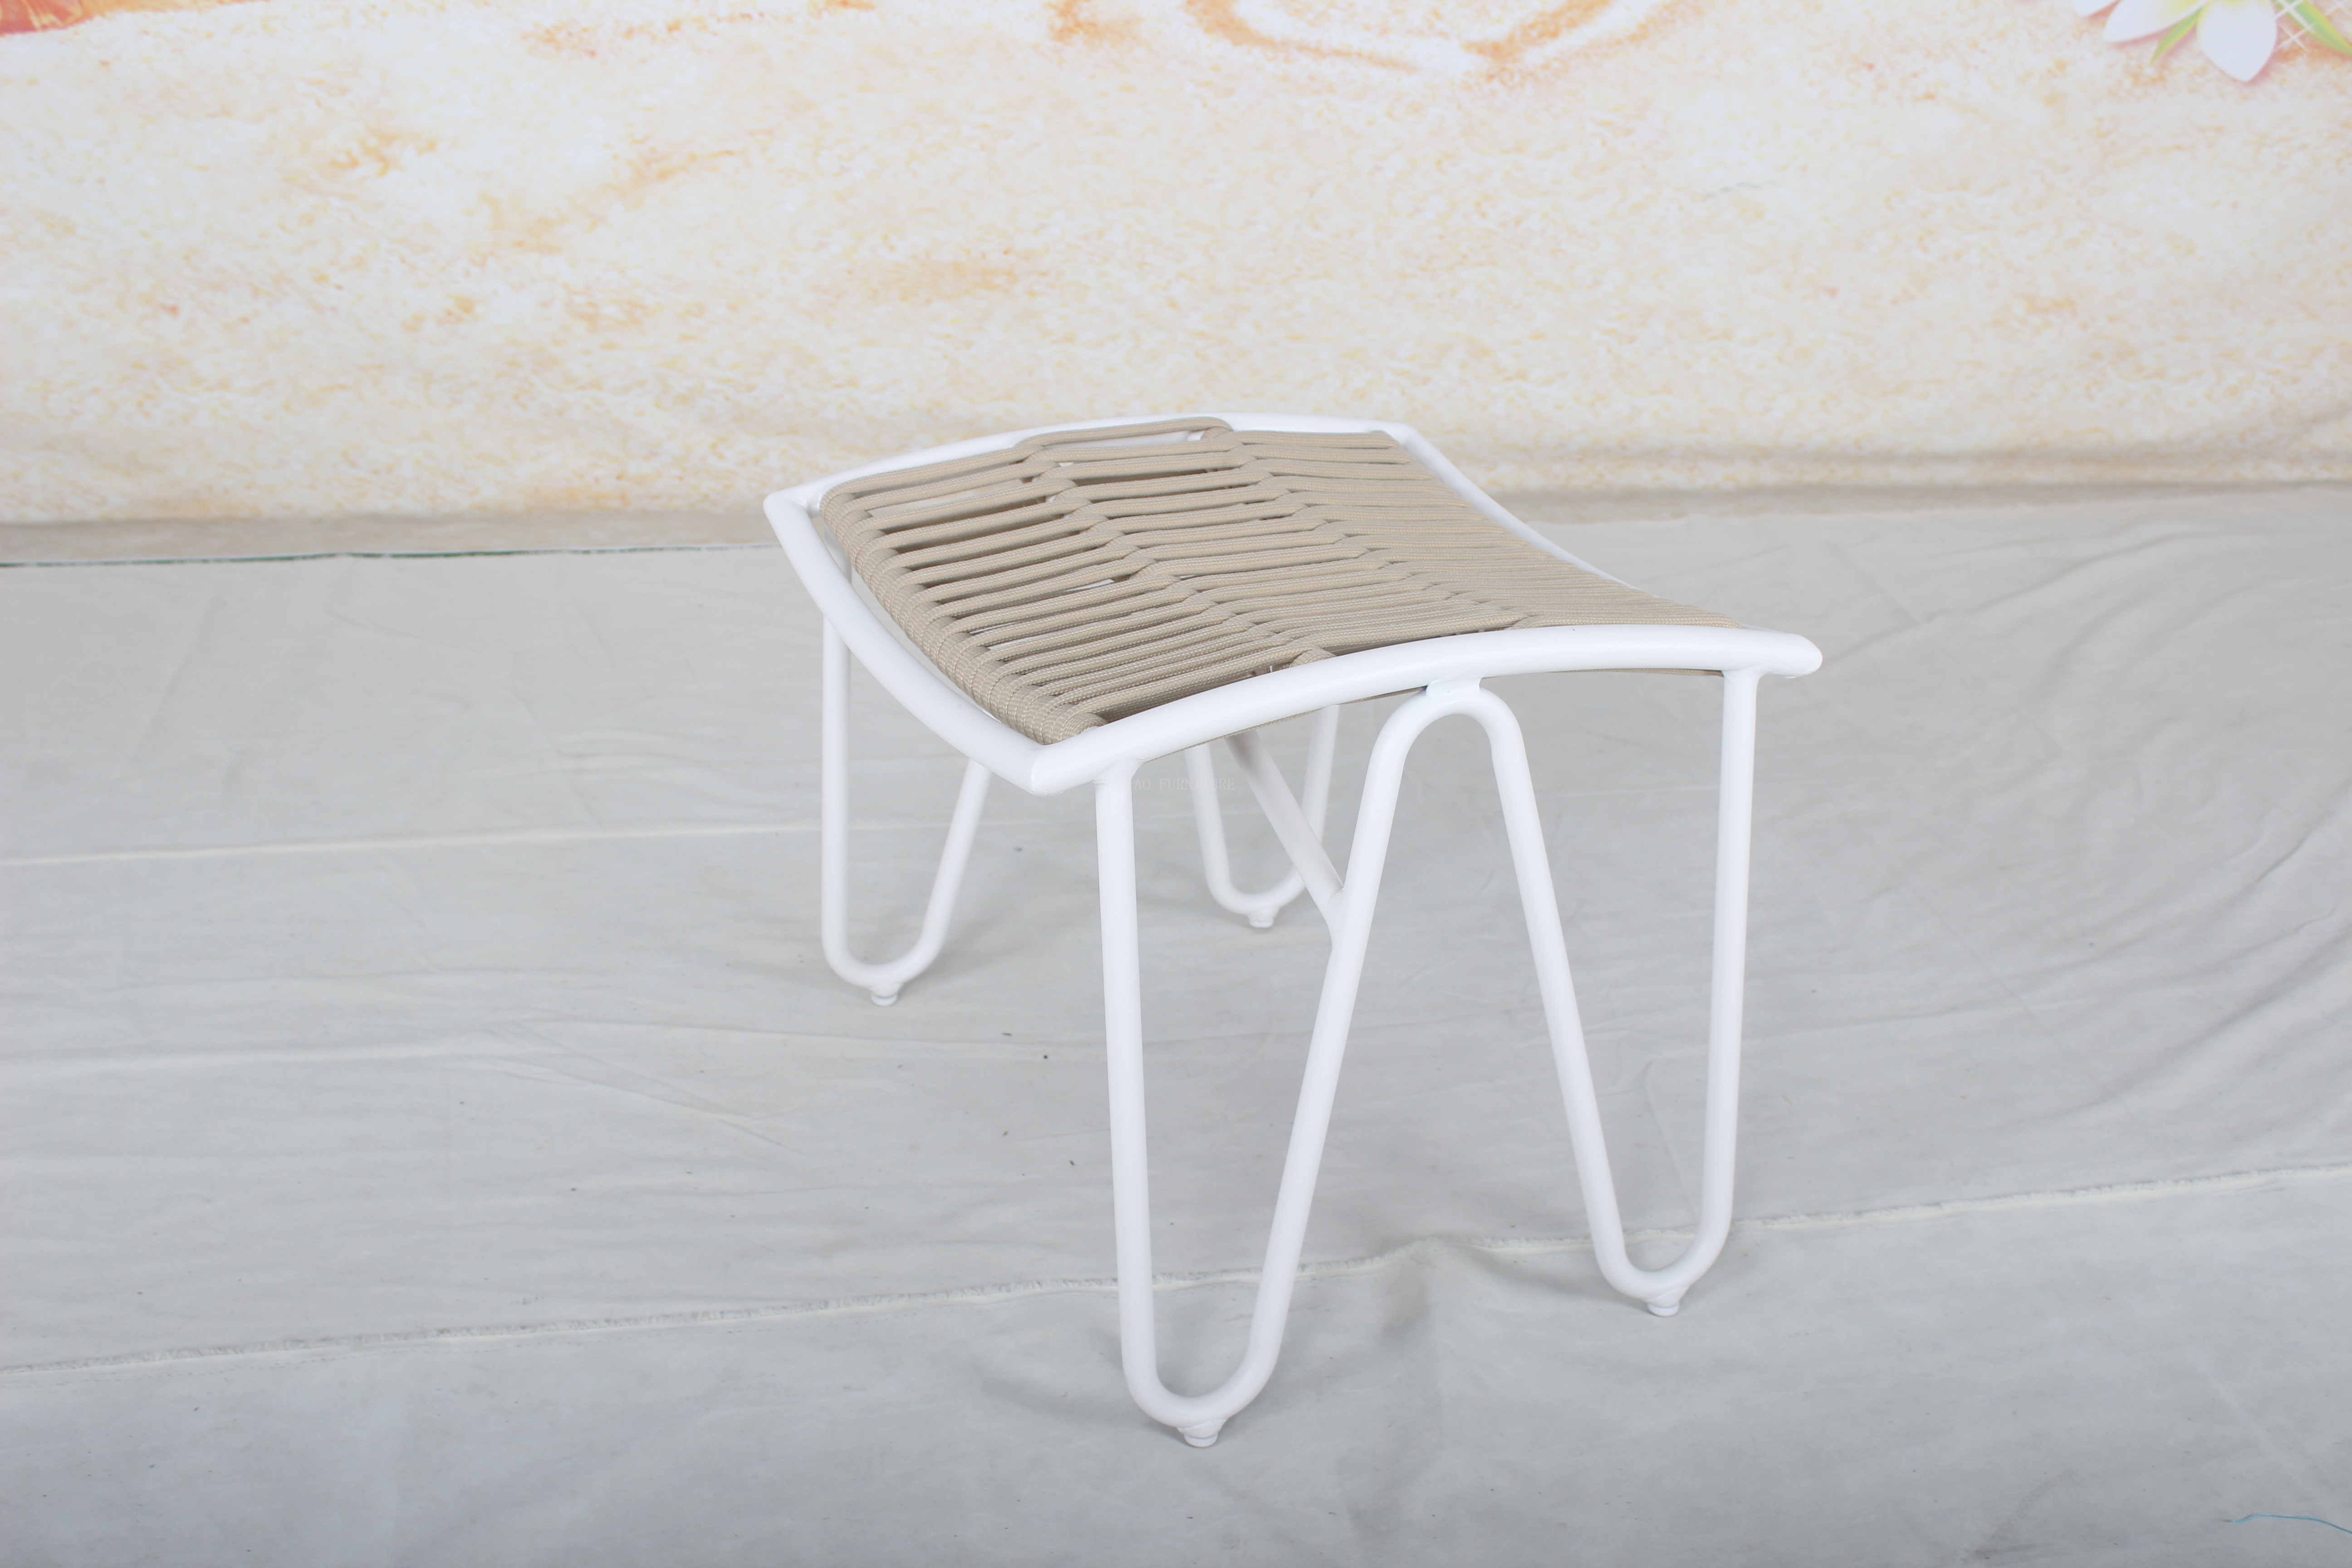 Aluminum patio rope chair with ottoman